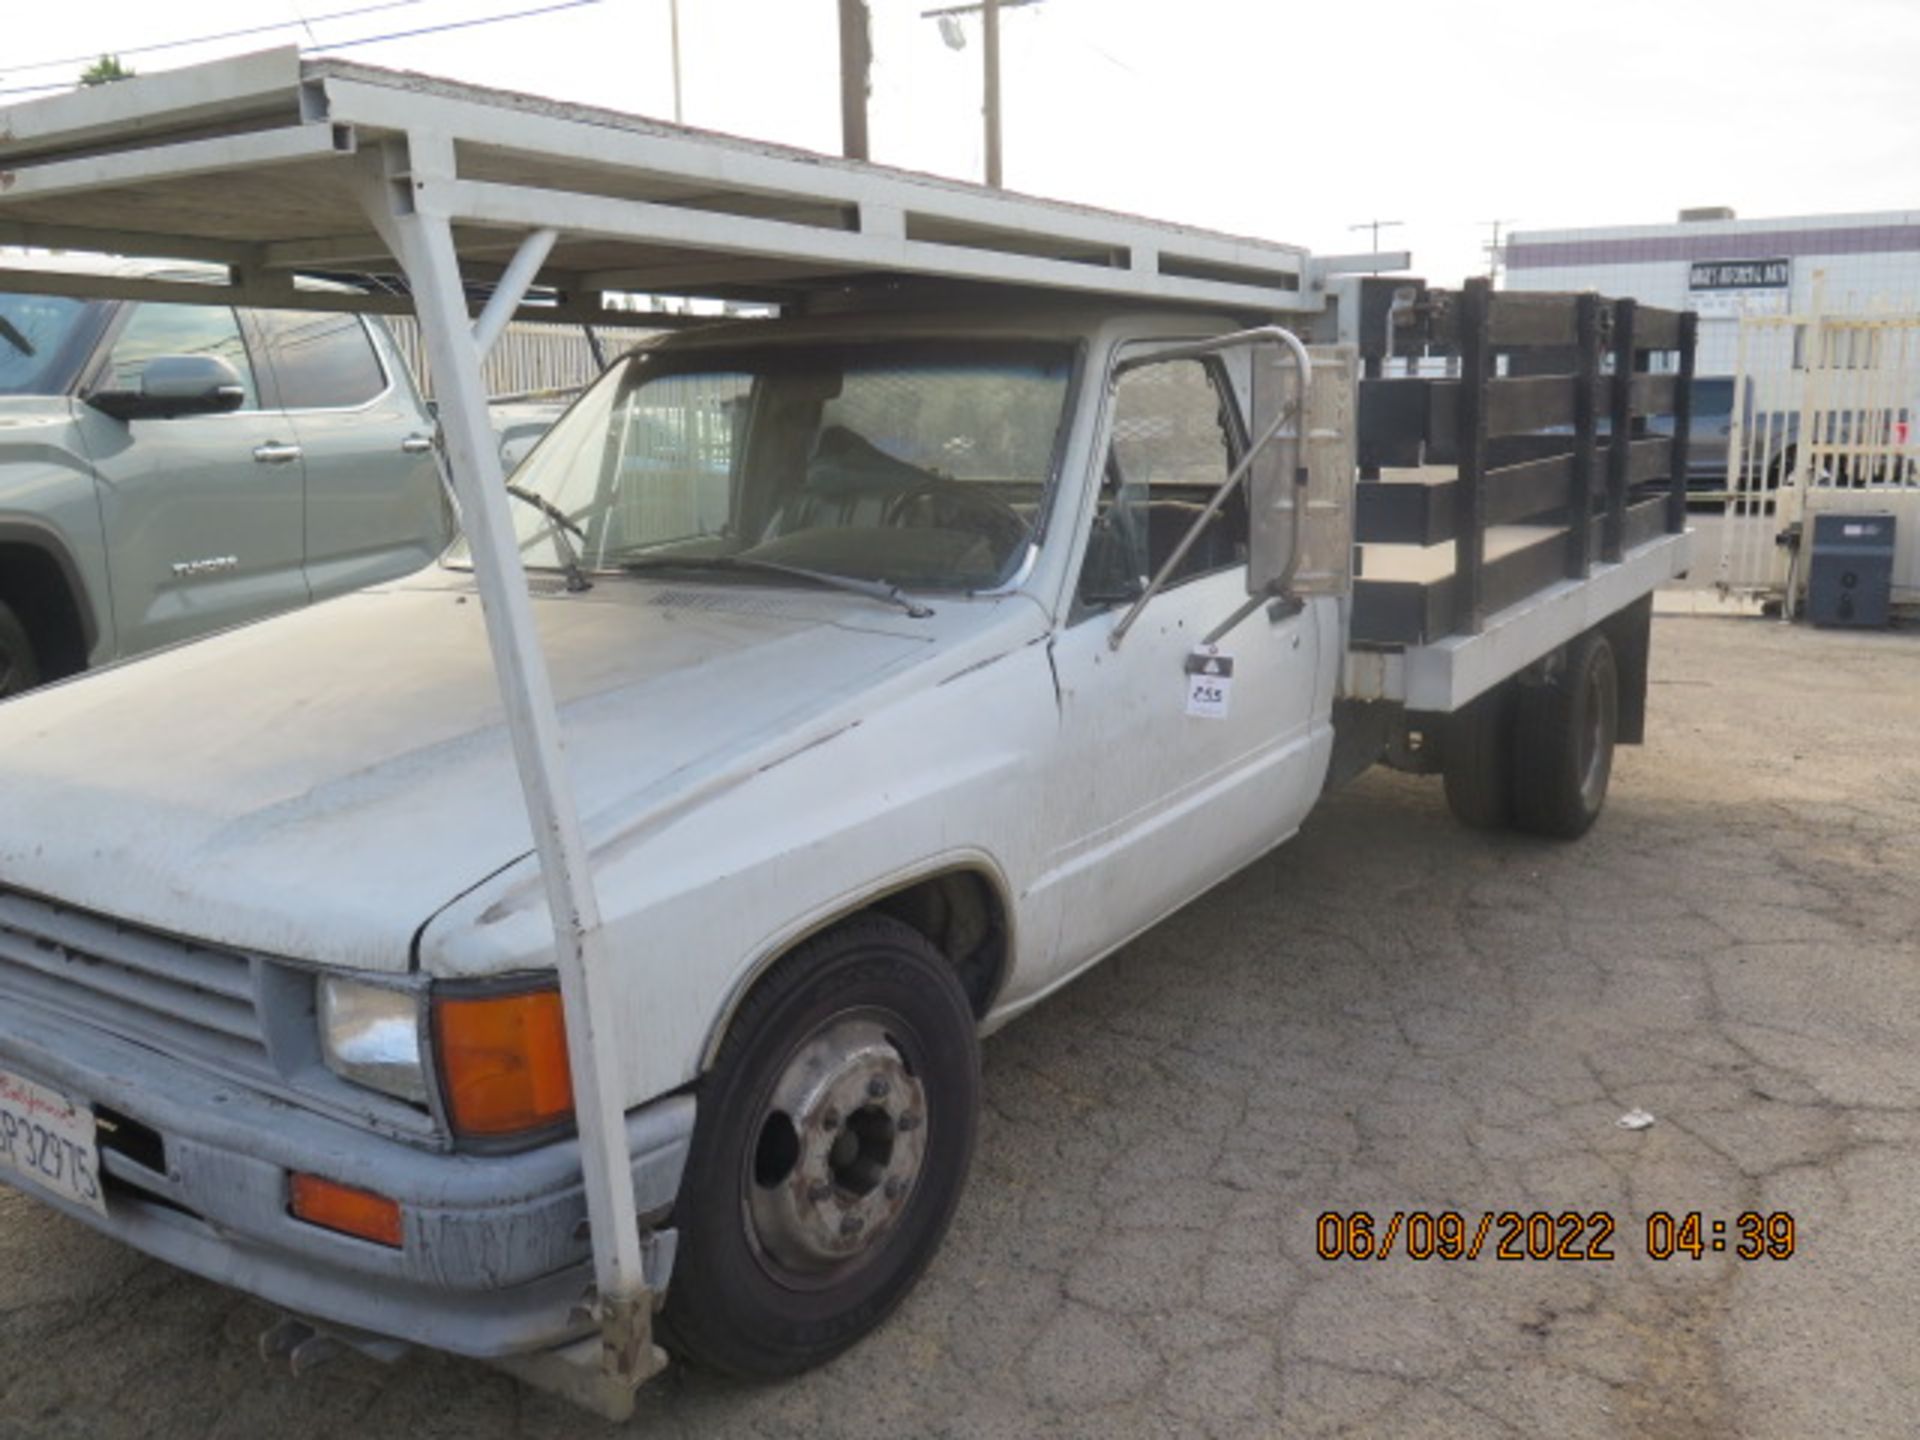 1987 Toyota 9' Stake Bed Truck Lisc# 6P32975 w/ Gas Engine, 5-Speed Manual Trans, SOLD AS IS